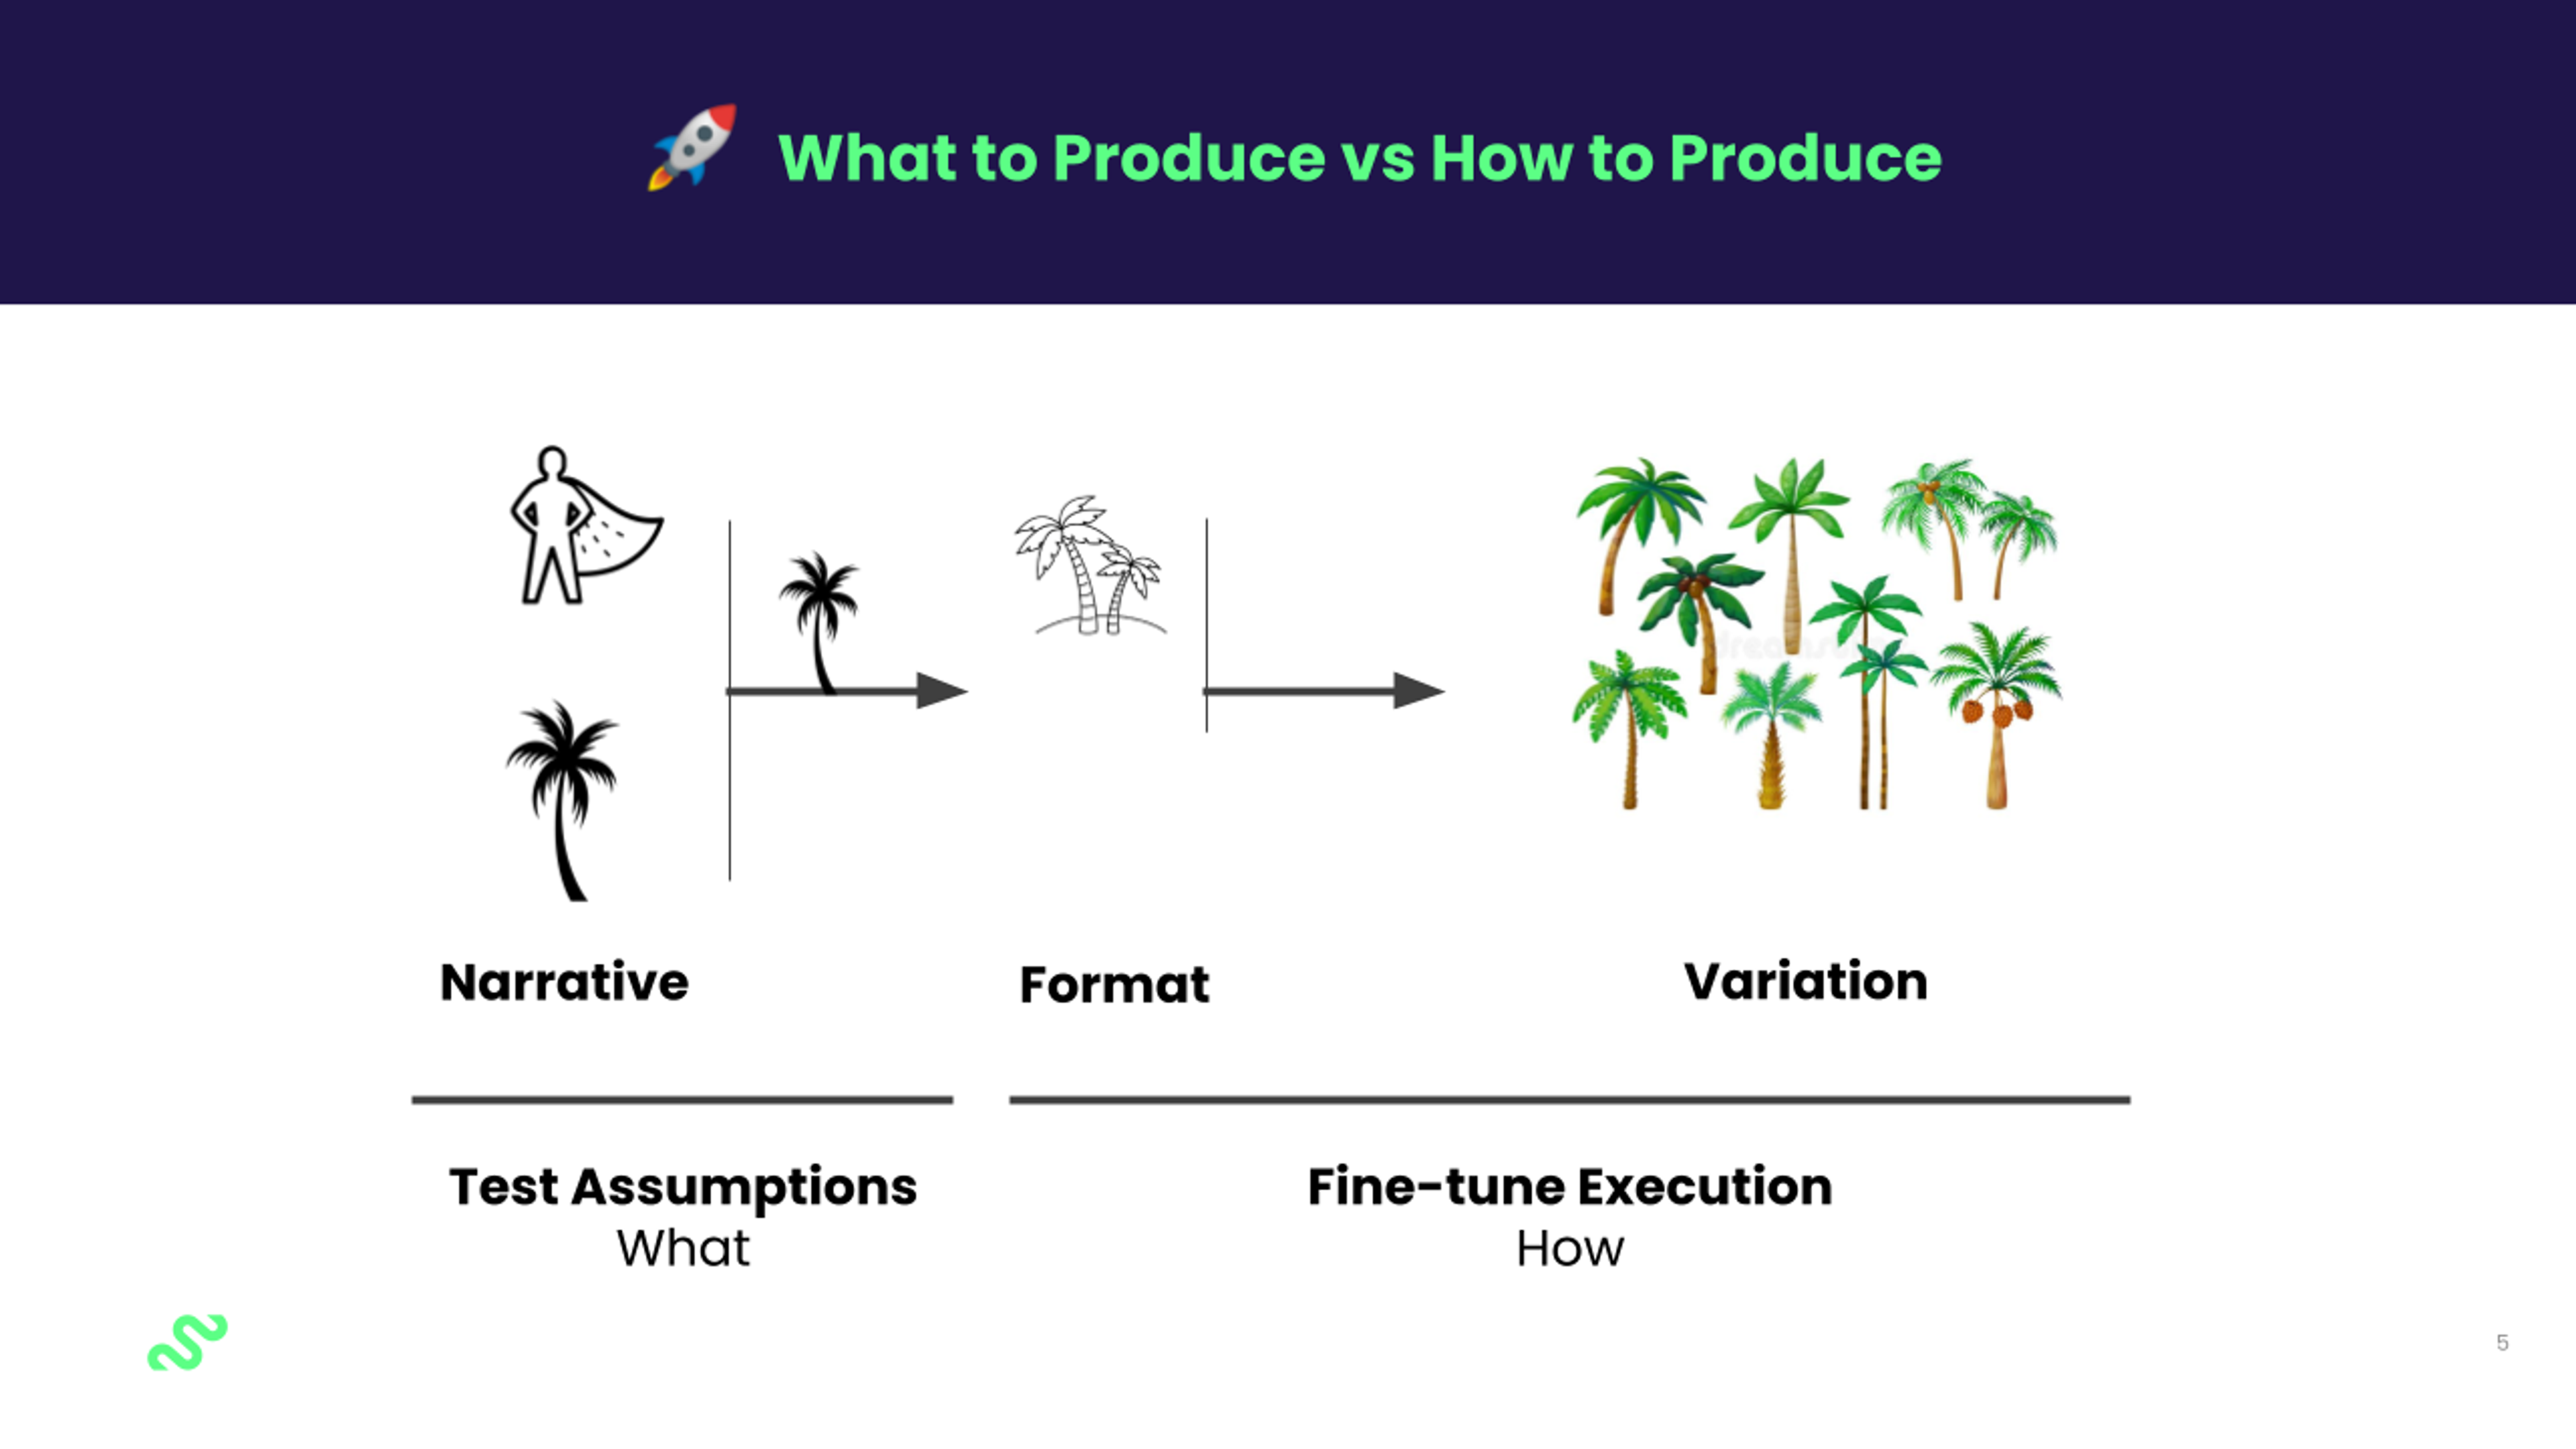 This infographic shows the narrative, format and variation phases for scaling quality performance marketing creative—allowing you to test assumptions and fine-tune execution. 